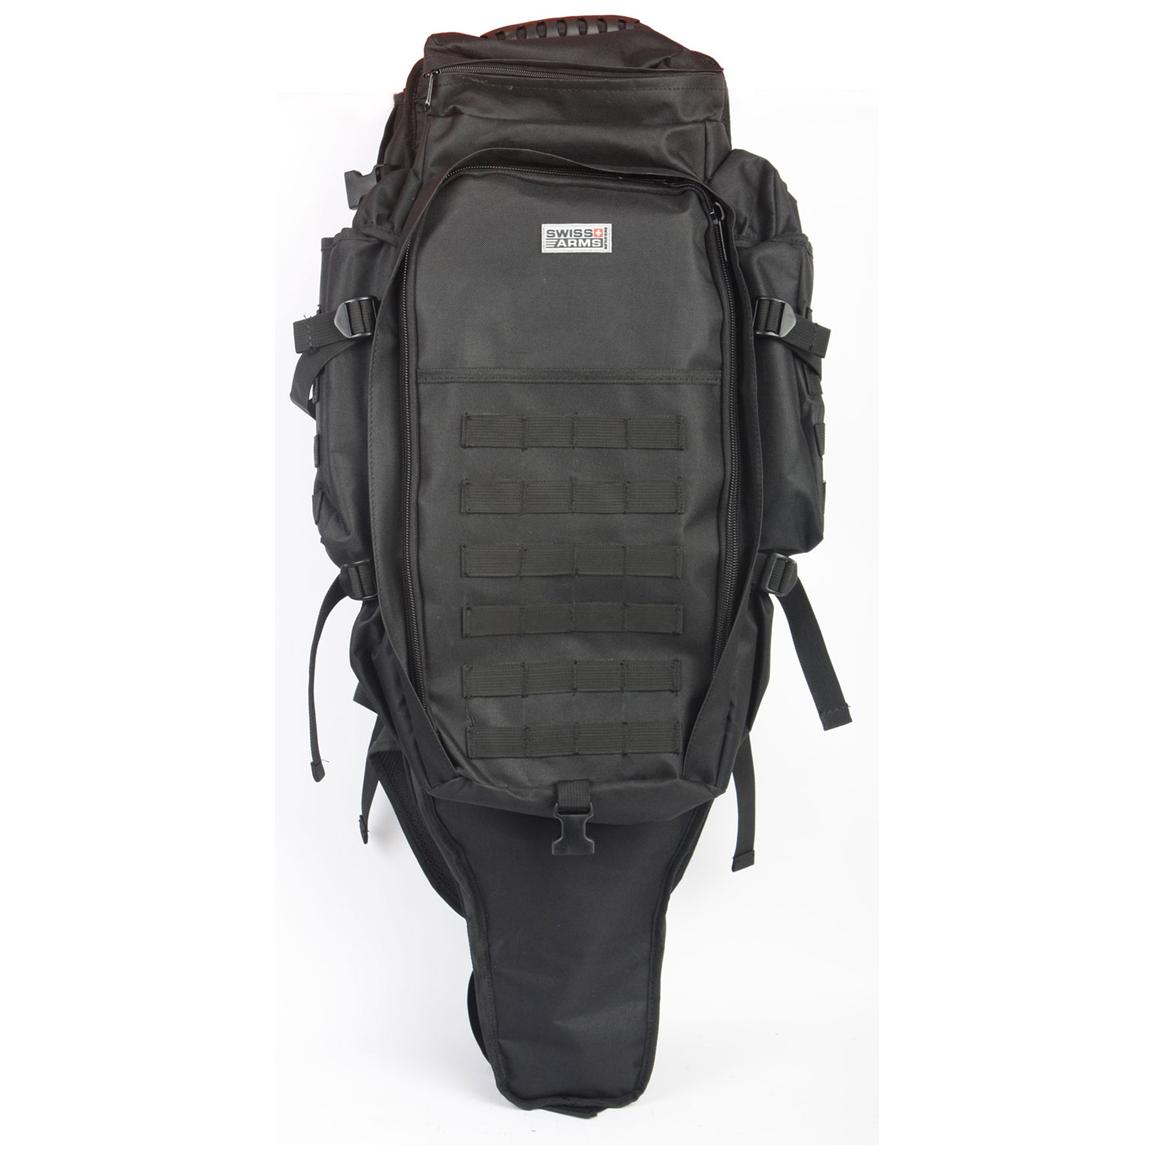 Swiss Arms® Rifle Backpack - 423786, Airsoft Accessories at Sportsman's ...